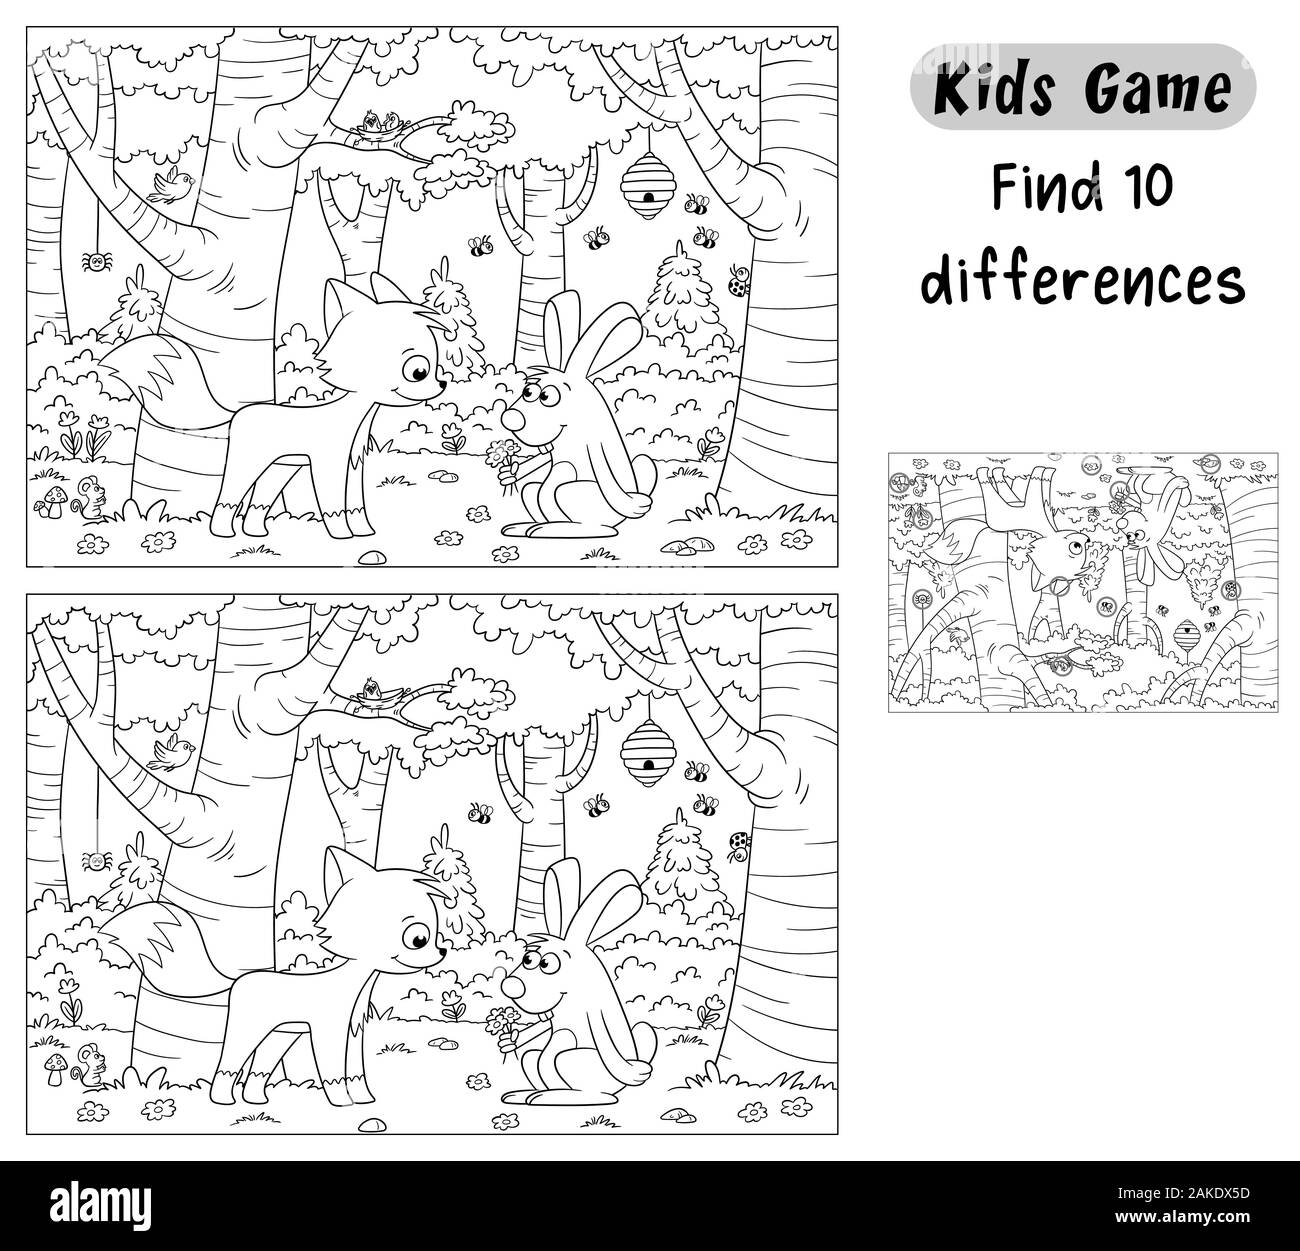 Find 10 differences. Funny cartoon game for kids, with solution. Vector illustration with separate layers. Stock Vector